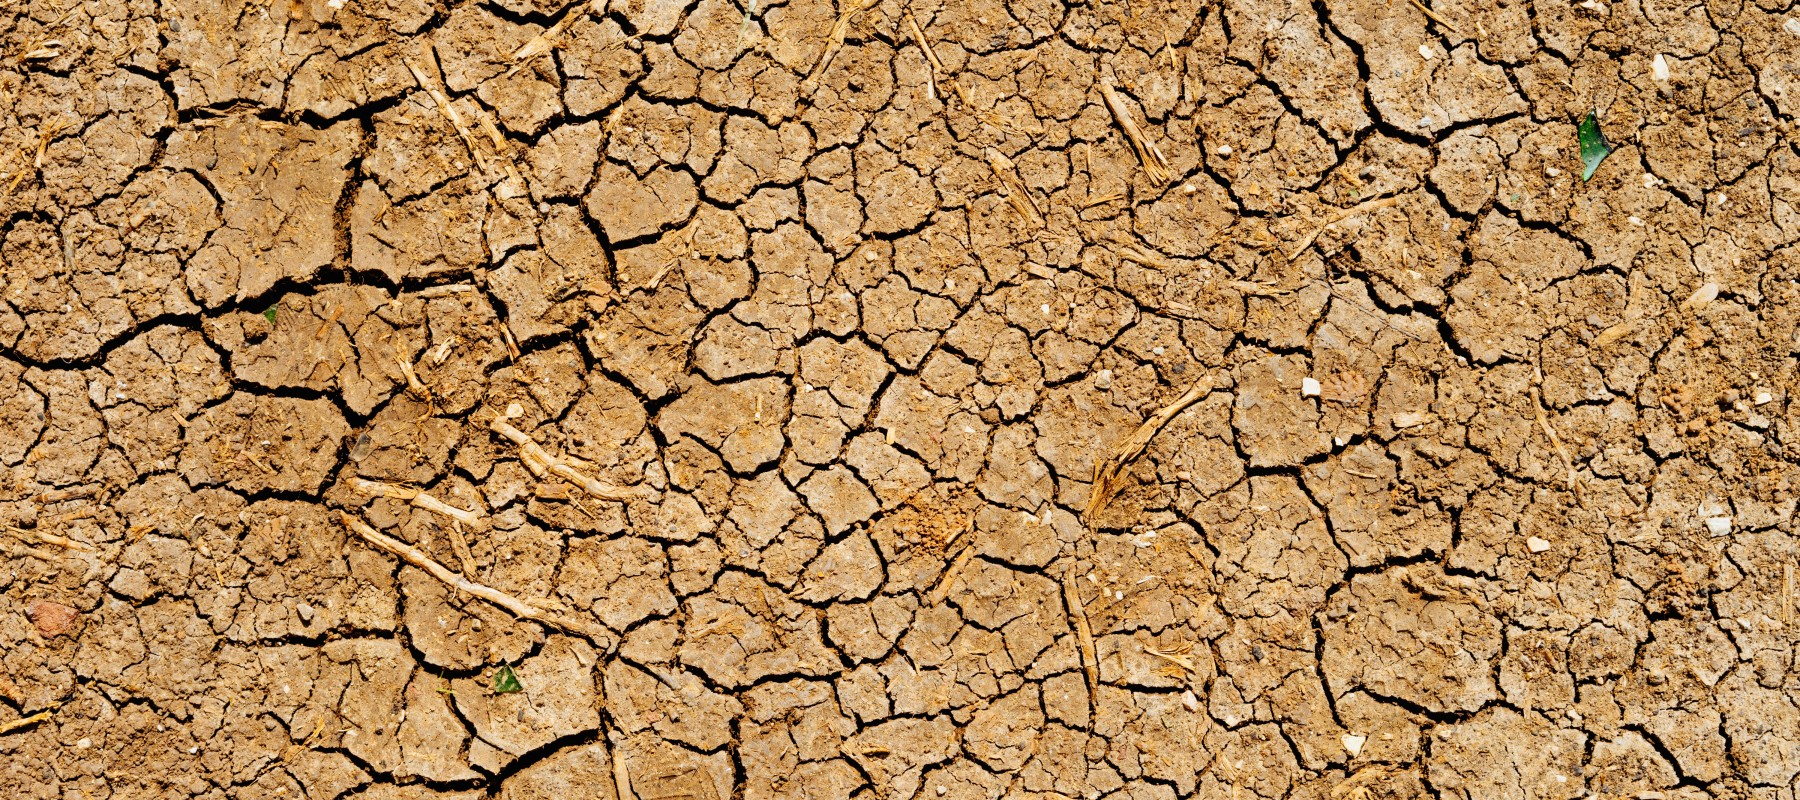 The climate crisis is a water crisis